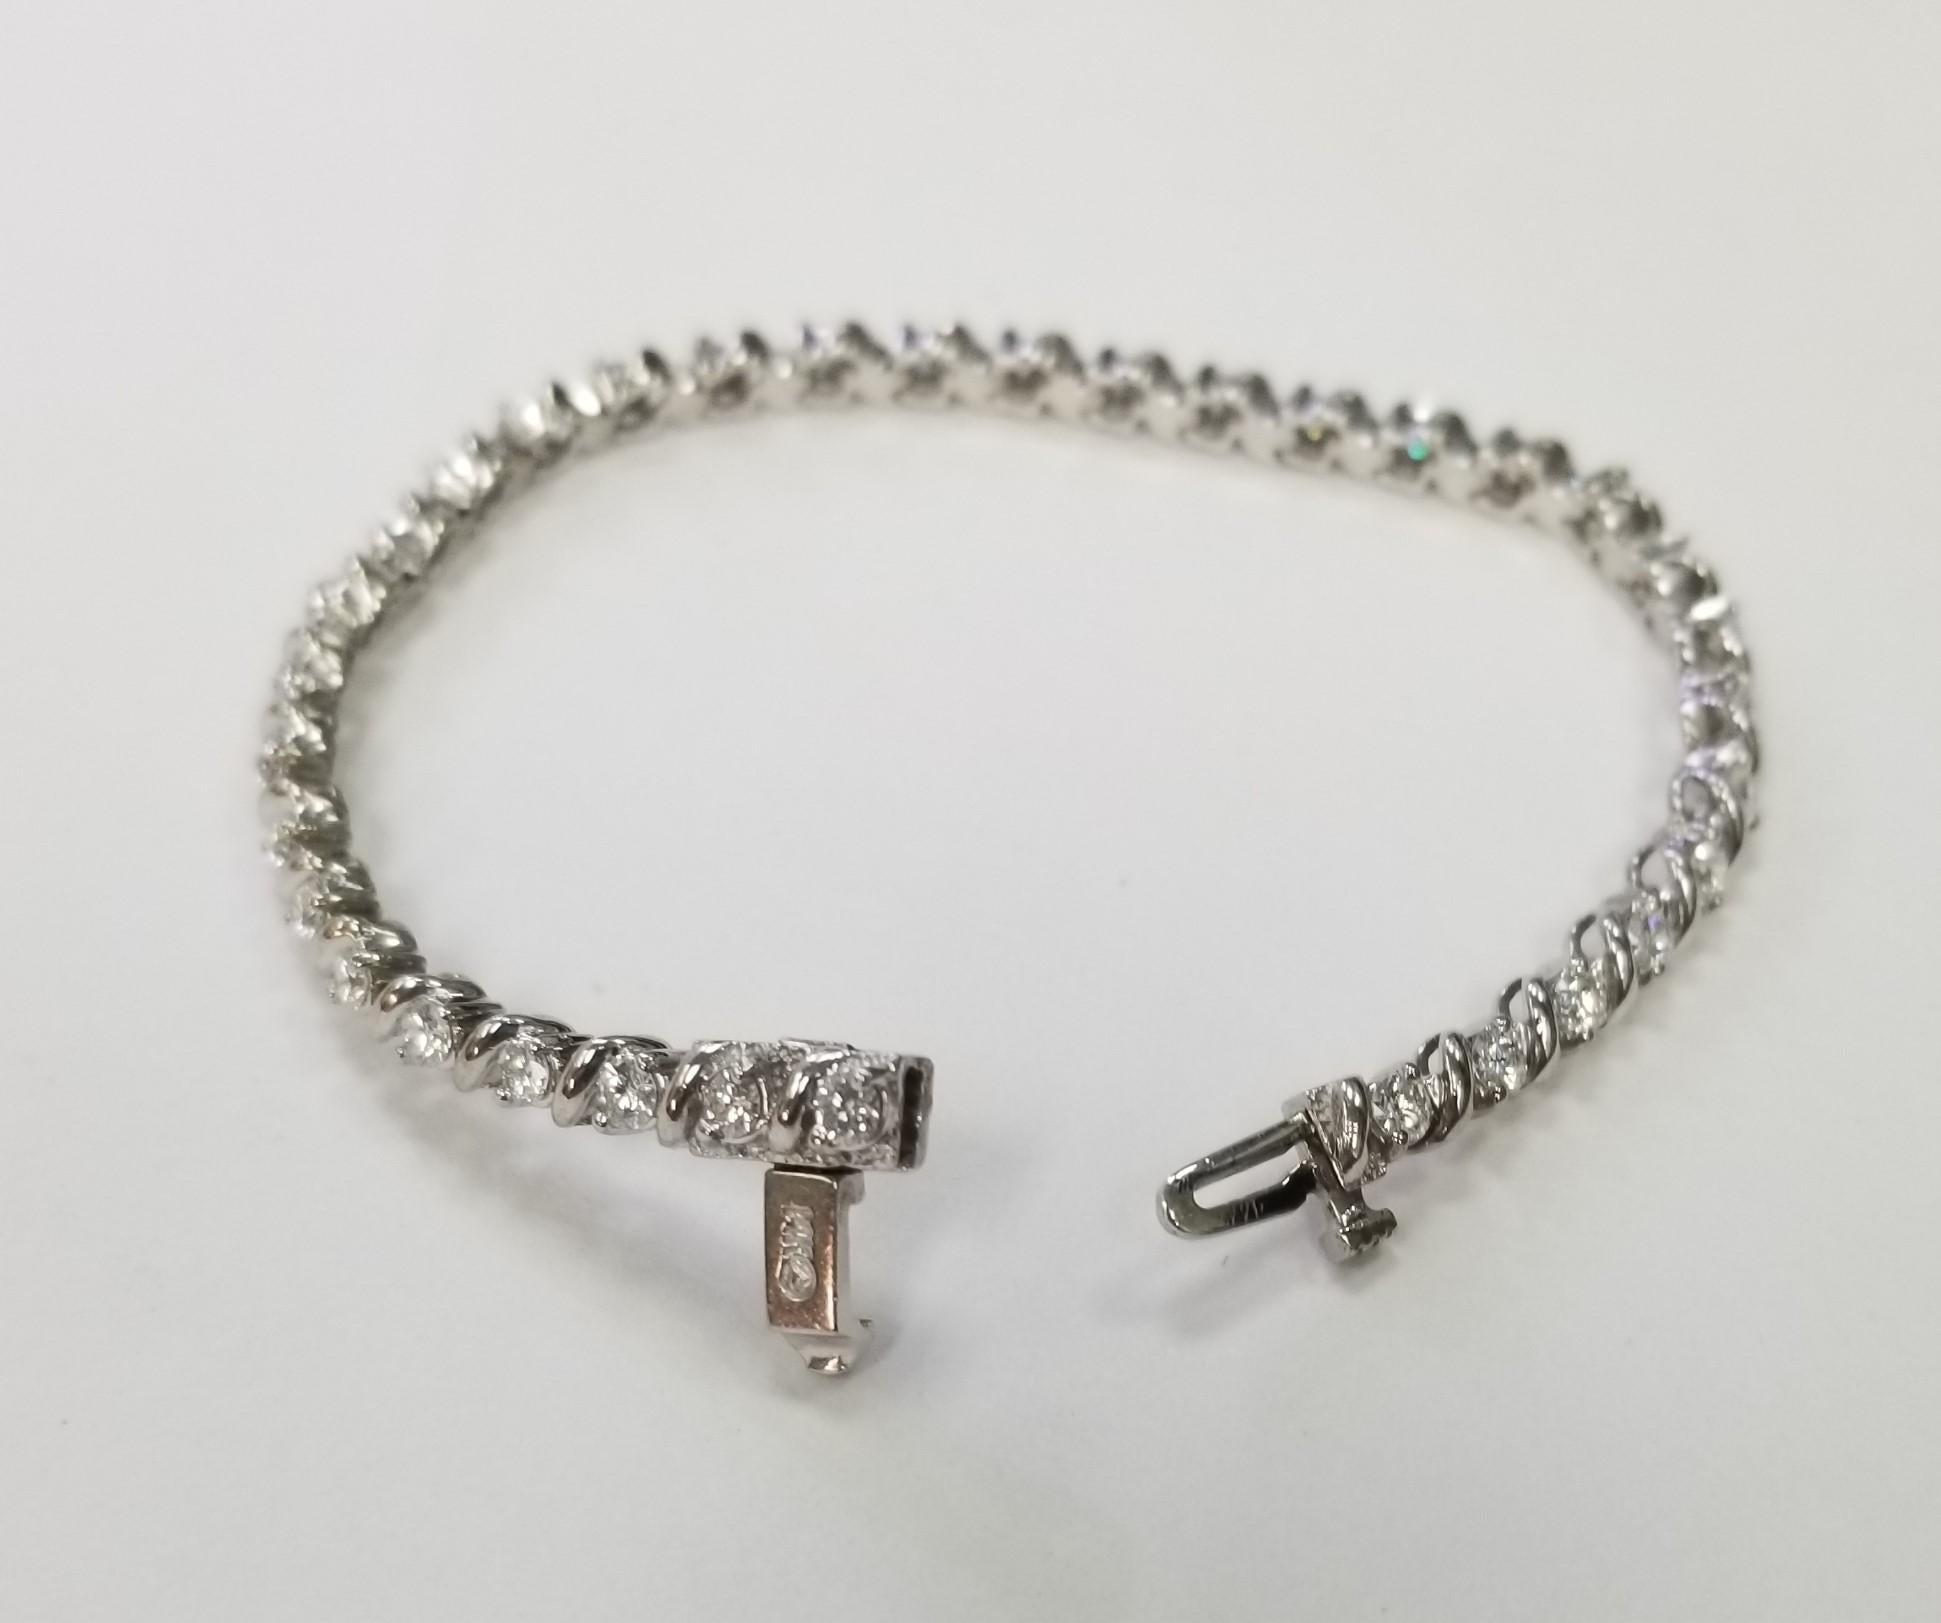 Specifications:
Metal: 14K White Gold
Weight: 13 Gr
Length: 7 inch
Carat Total Weight: 34 Diamonds  3.50 CTW
Color: F-G
Clarity:VS1
with very strong double clasp